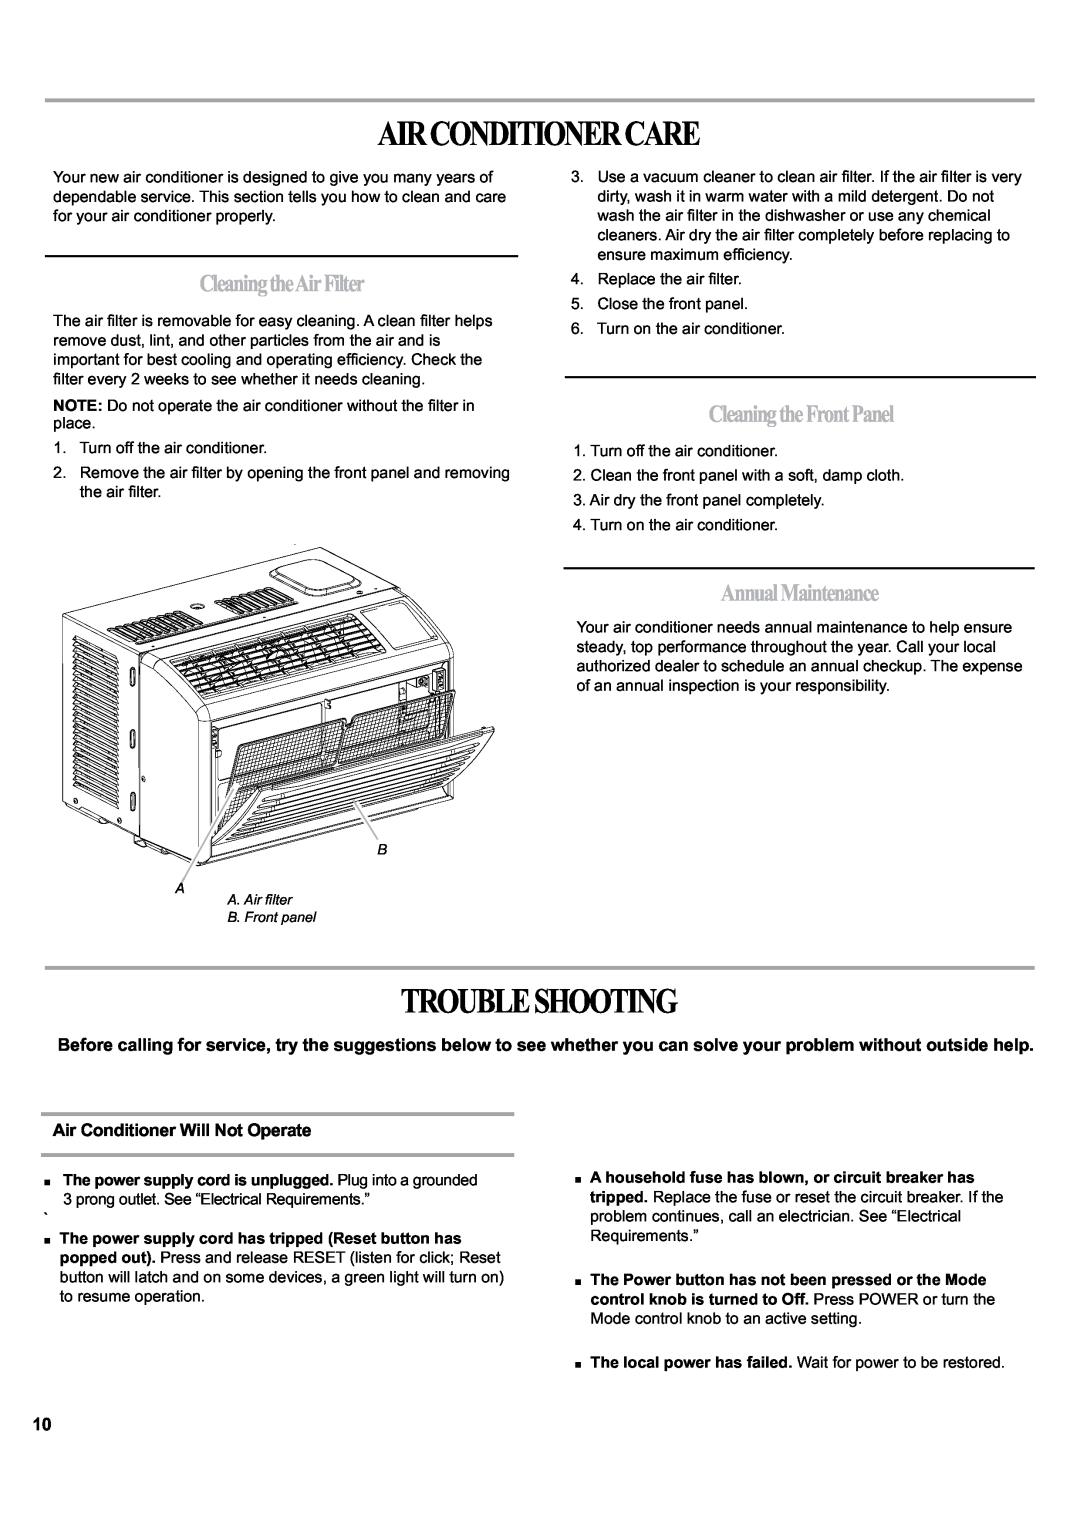 Haier HWF05XCK-L manual Airconditionercare, Troubleshooting, CleaningtheAirFilter, CleaningtheFrontPanel, AnnualMaintenance 